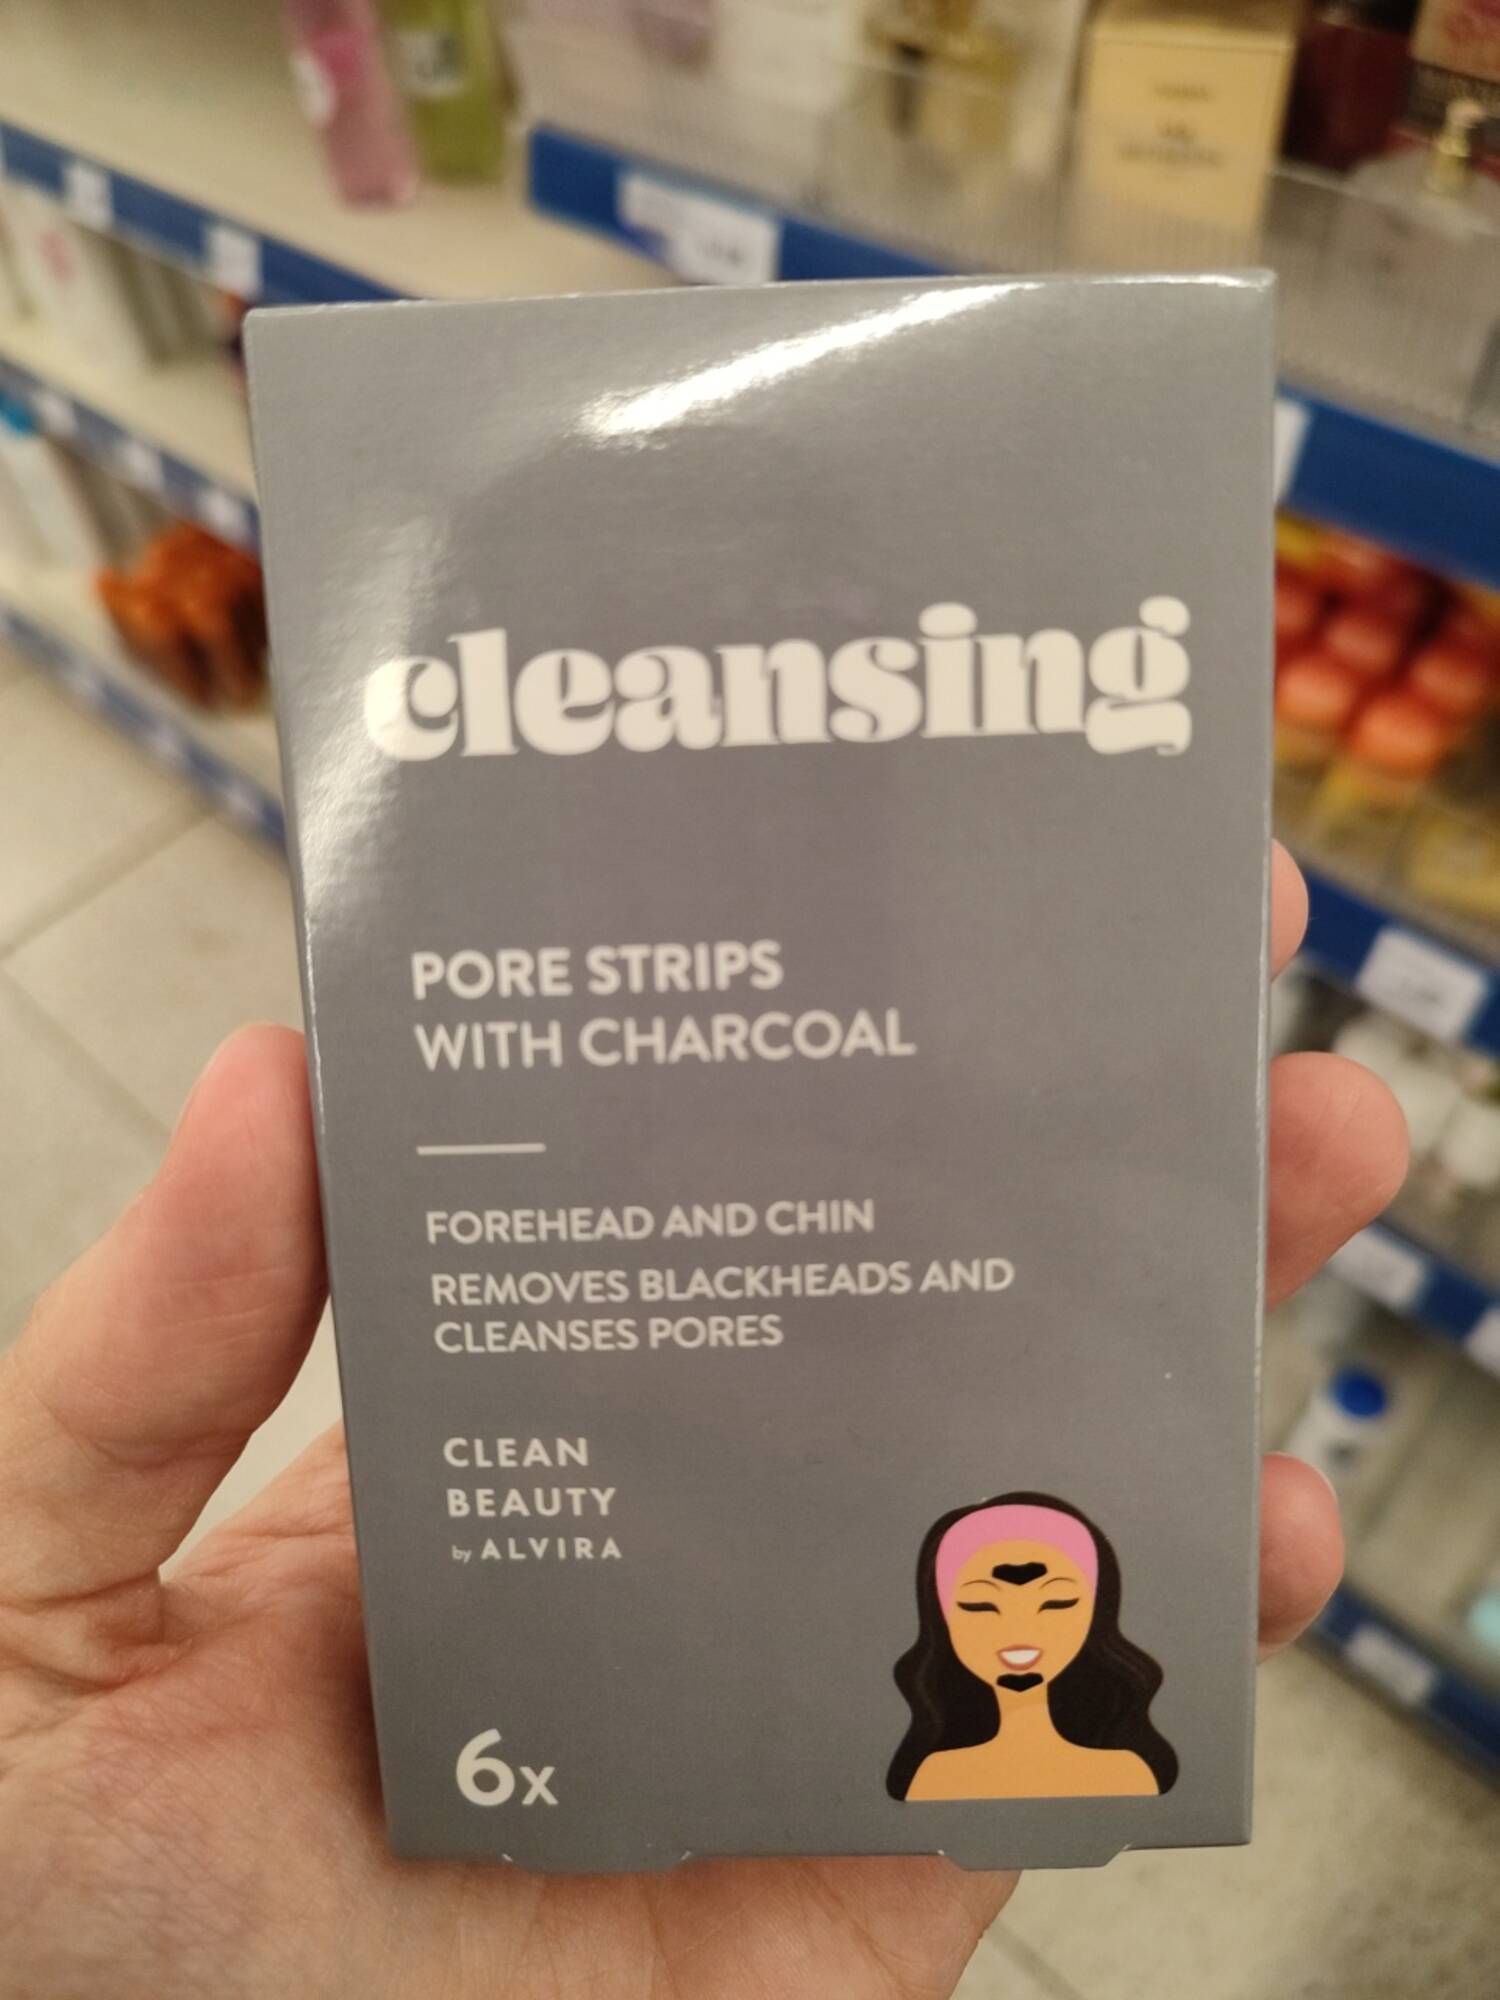 DAYES - Cleansing - Pore strips with charcoal